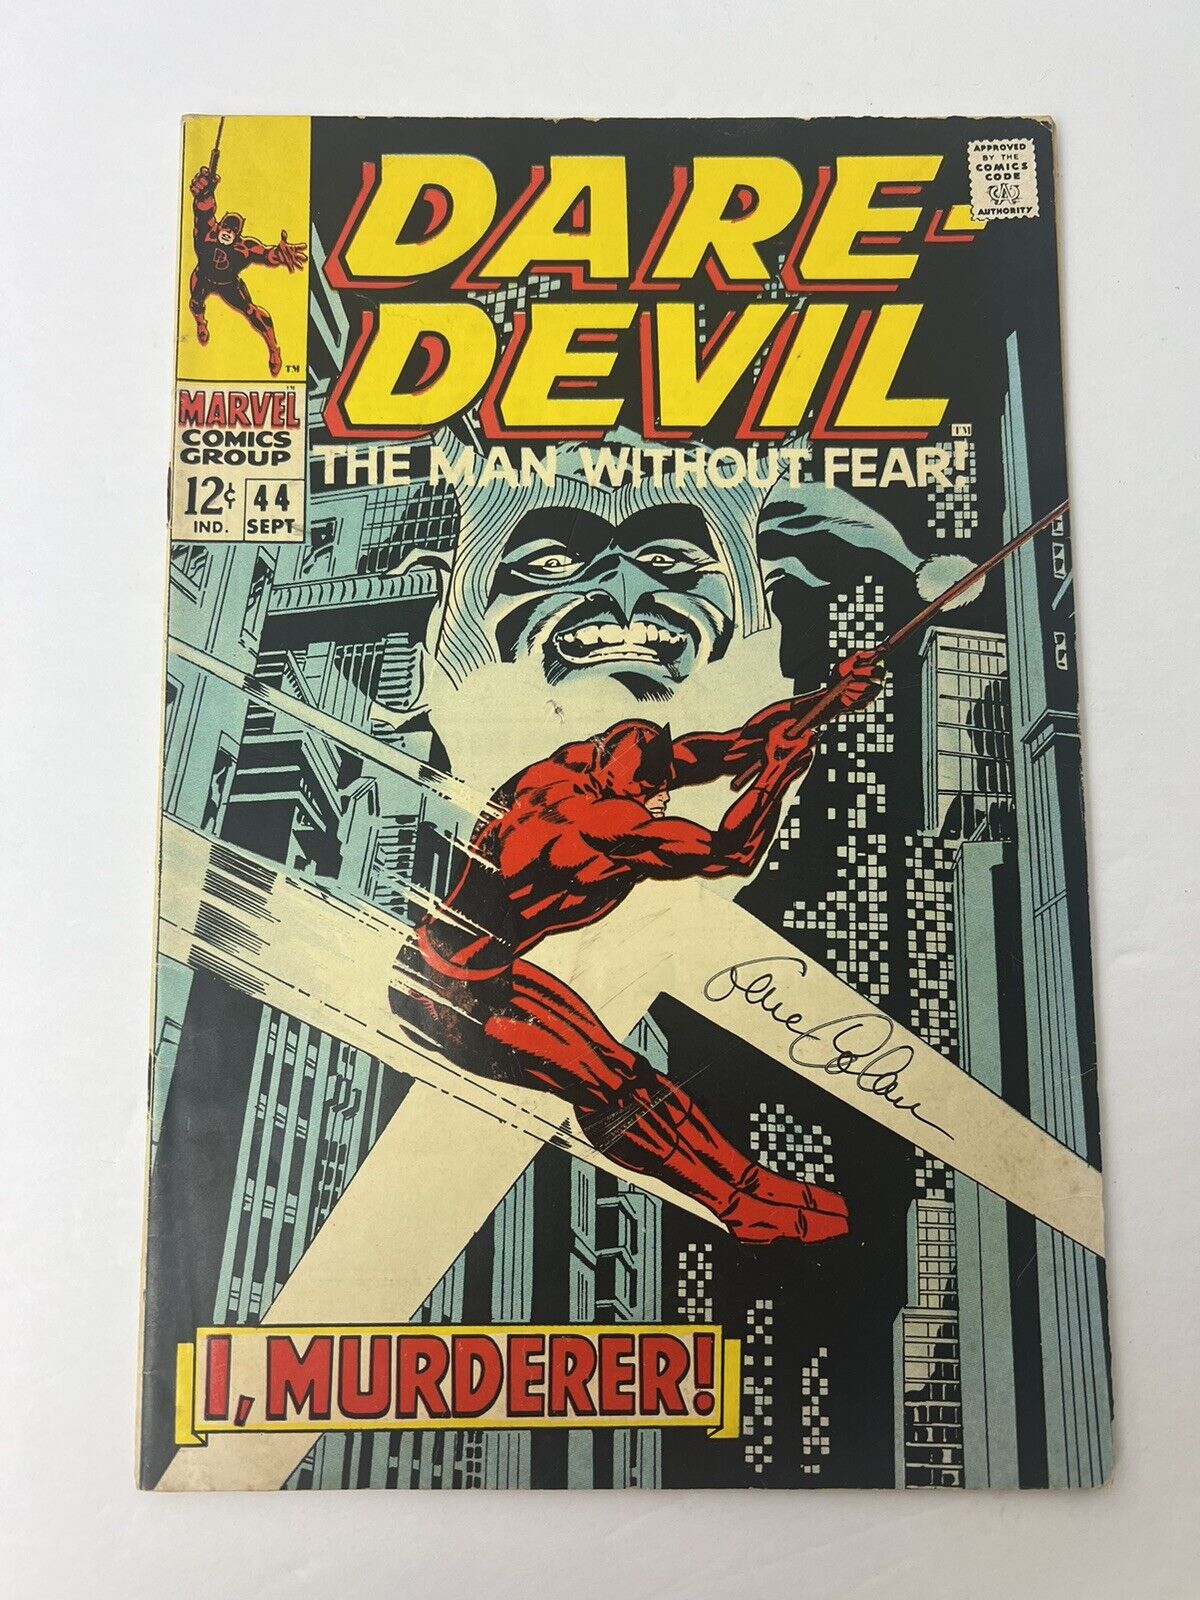 Daredevil The Men Without Fear #44 Marvel Comics 1968 Signed By Gene Colan